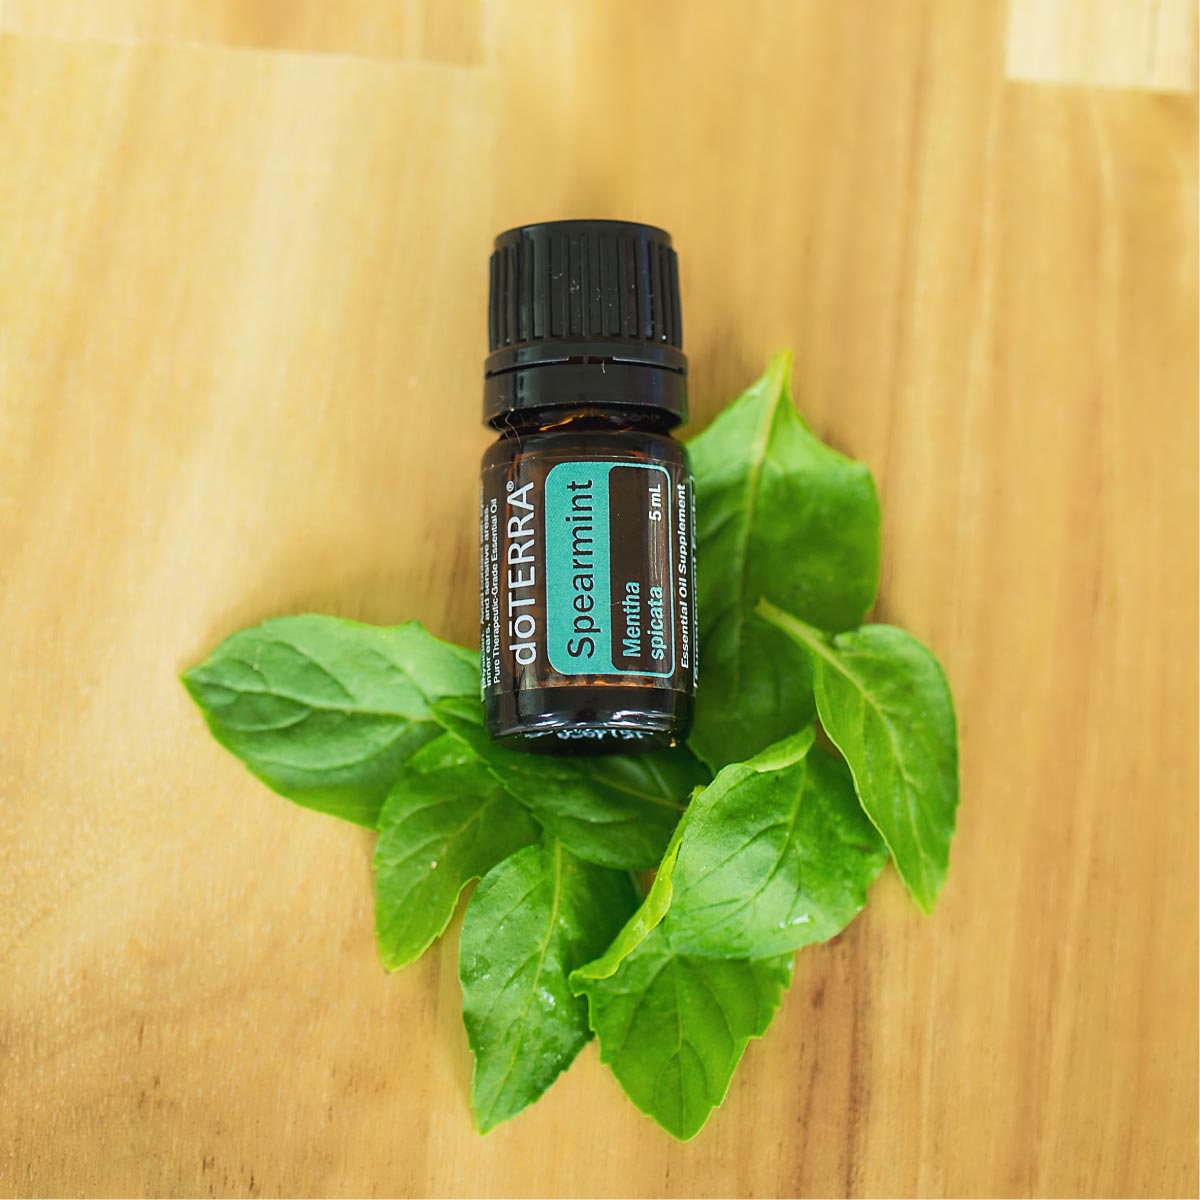 Spearmint oil bottle with fresh spearmint leaves. What are the benefits of Spearmint oil? There are many benefits of Spearmint oil, including benefits for digestion, mood, and oral health.